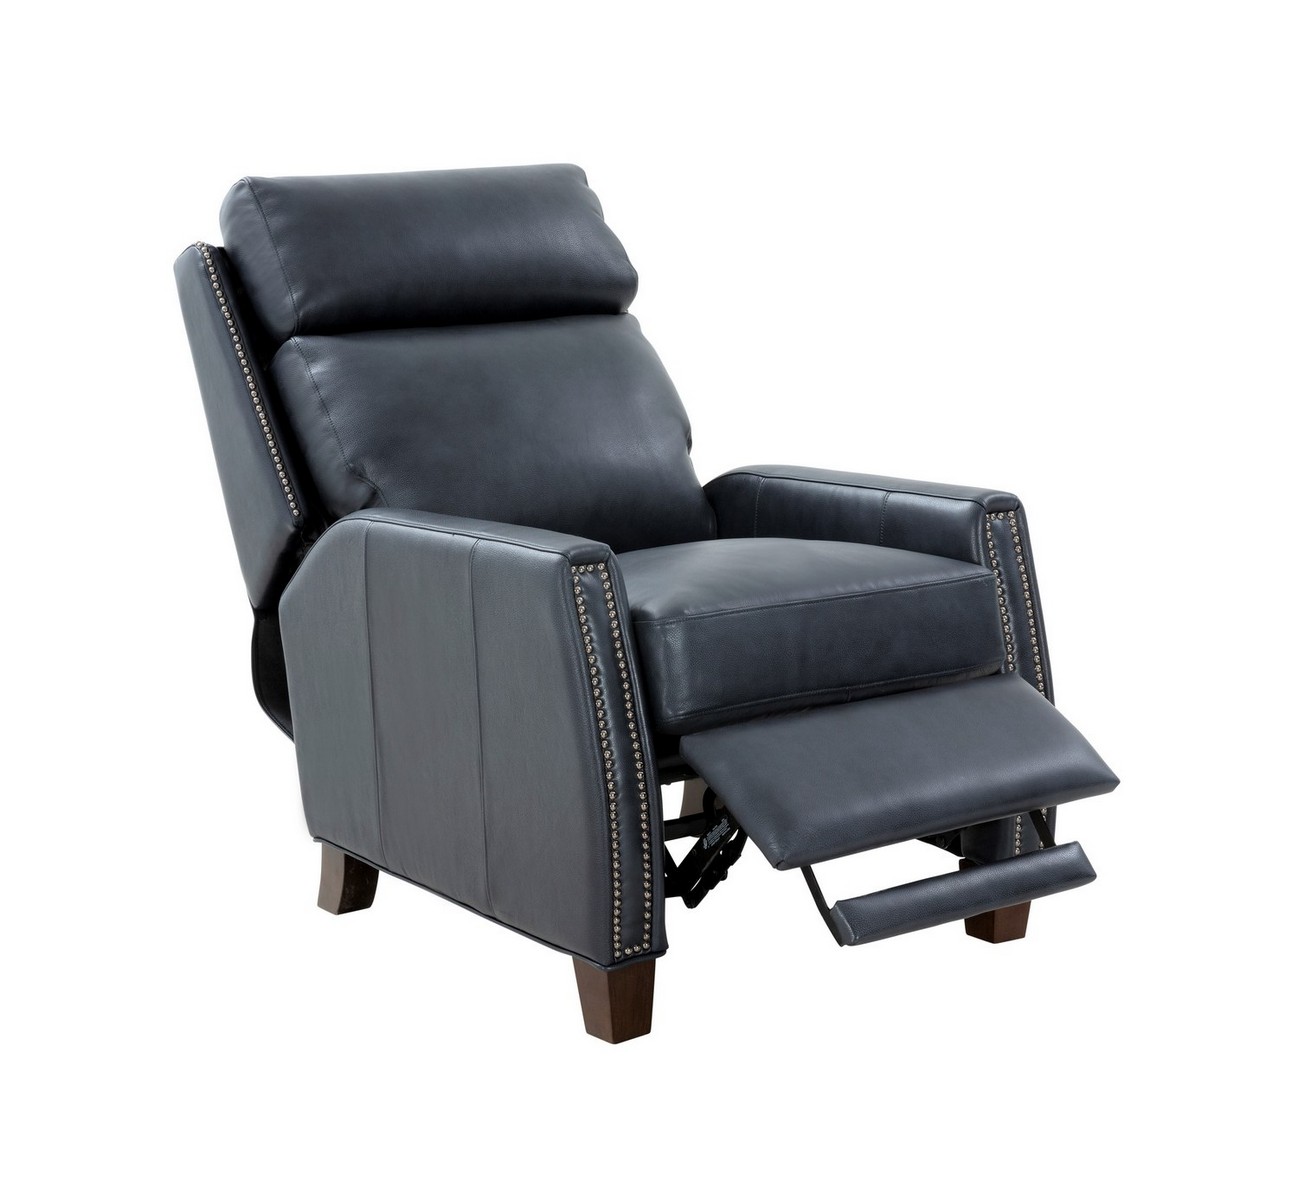 Barcalounger Anaheim Big and Tall Recliner Chair - Barone Navy Blue/All Leather